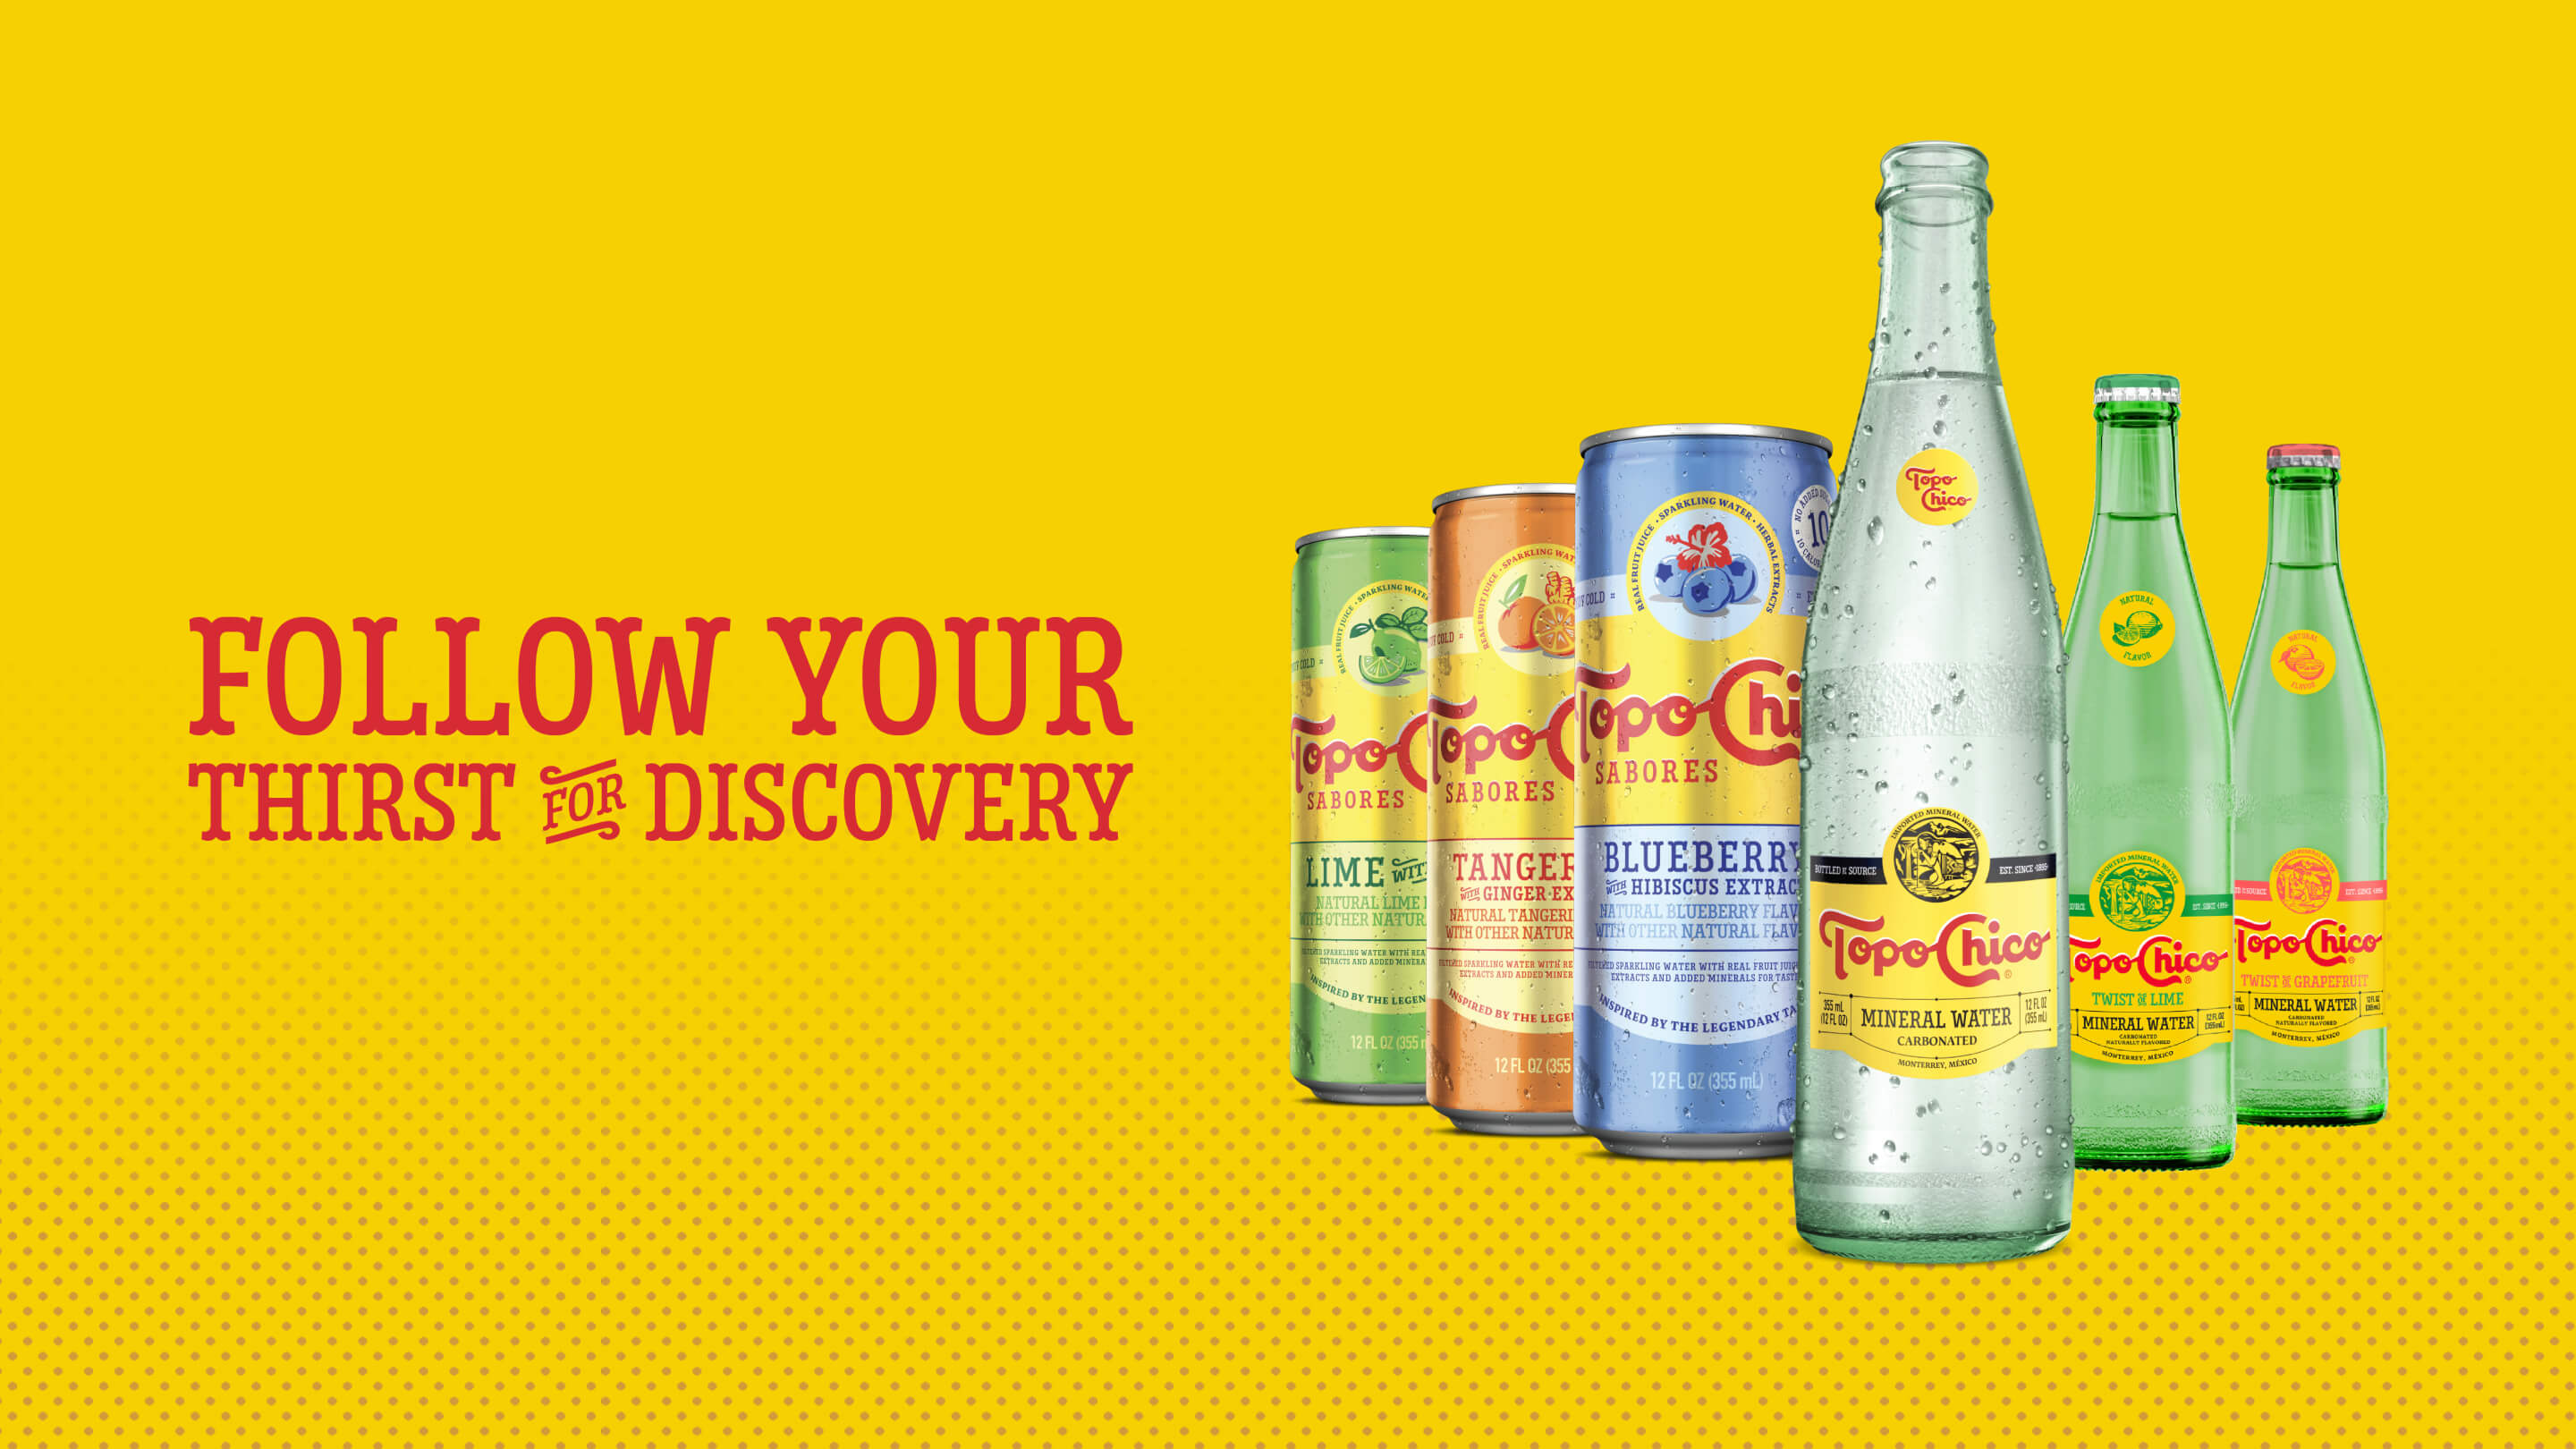 Topo Chico ad with three cans in a blue and yellow background, with the phrase "Flavors that just sip different"